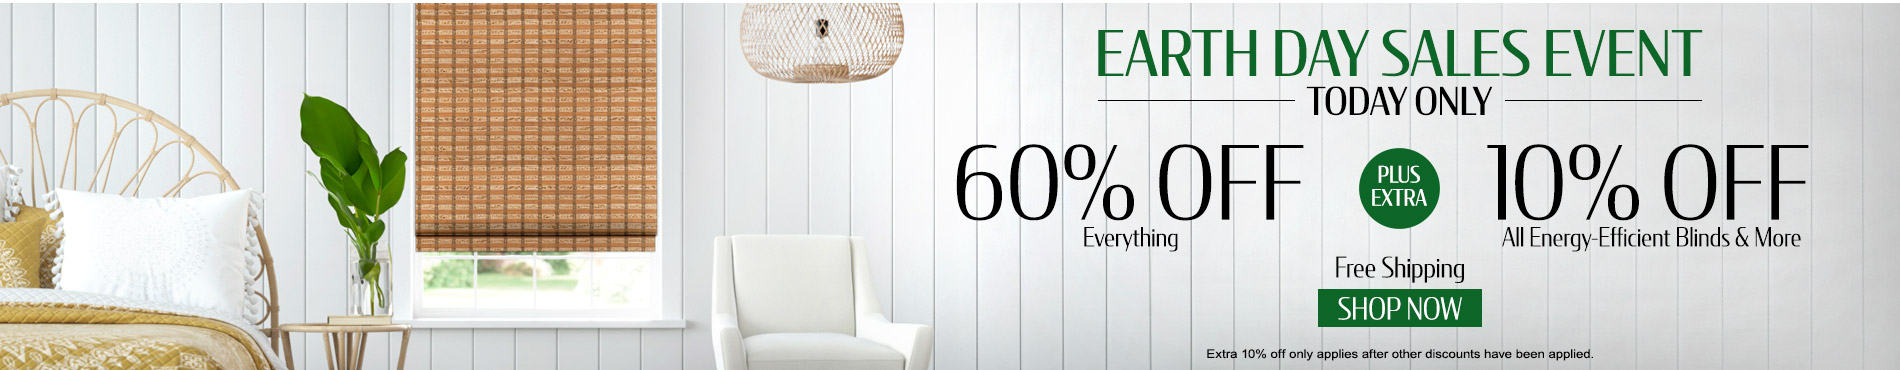 60% off everything plus extra 10% on All Energy-Efficient Blinds & More